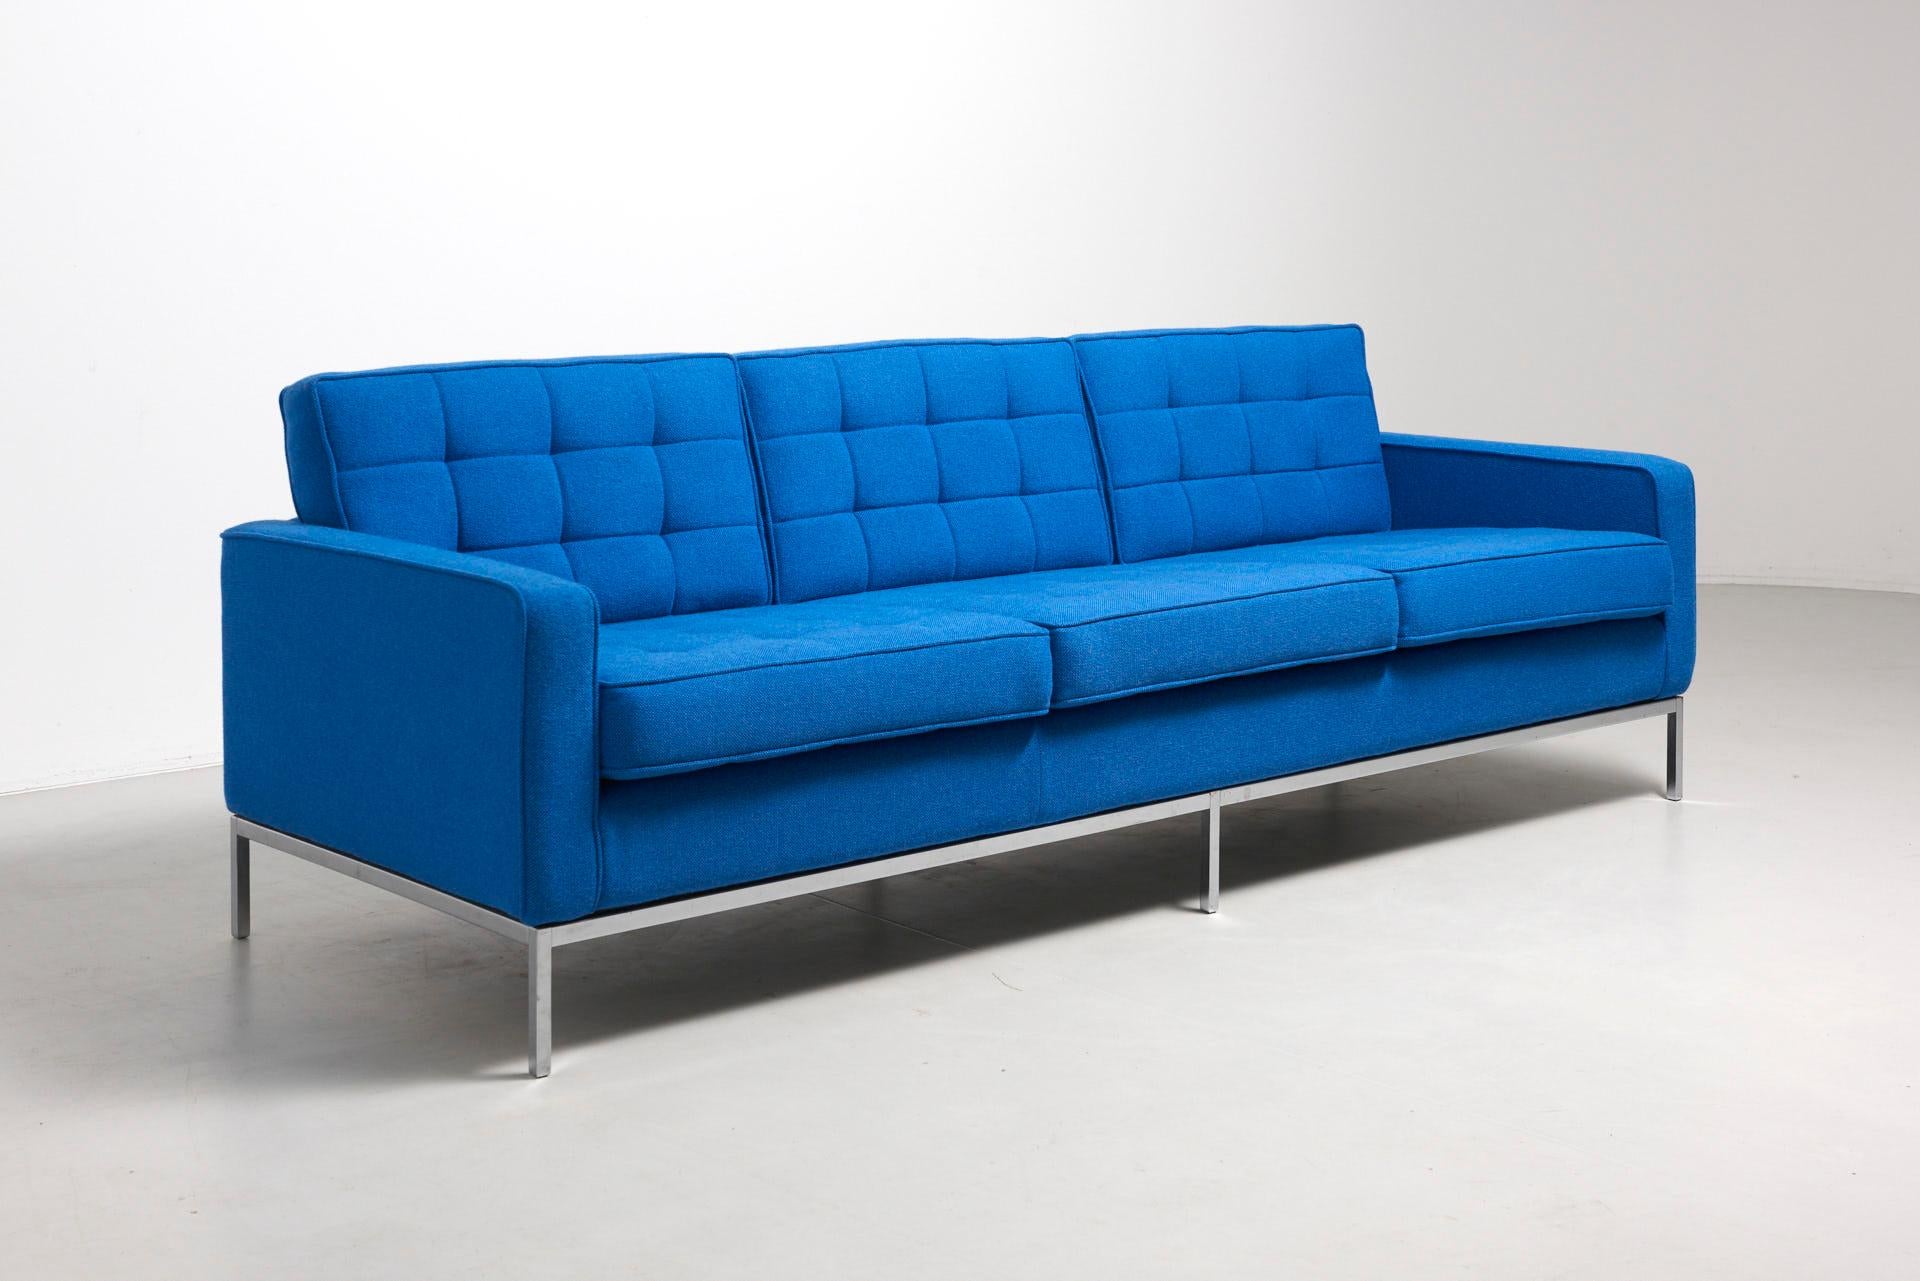 This 3 seat sofa, designed by Florence Knoll for Knoll International in 1954, is a timeless classic and example of midcentury modern furniture. The exposed metal frame with tubular steel legs carries a solid wood structure. The sofa has been